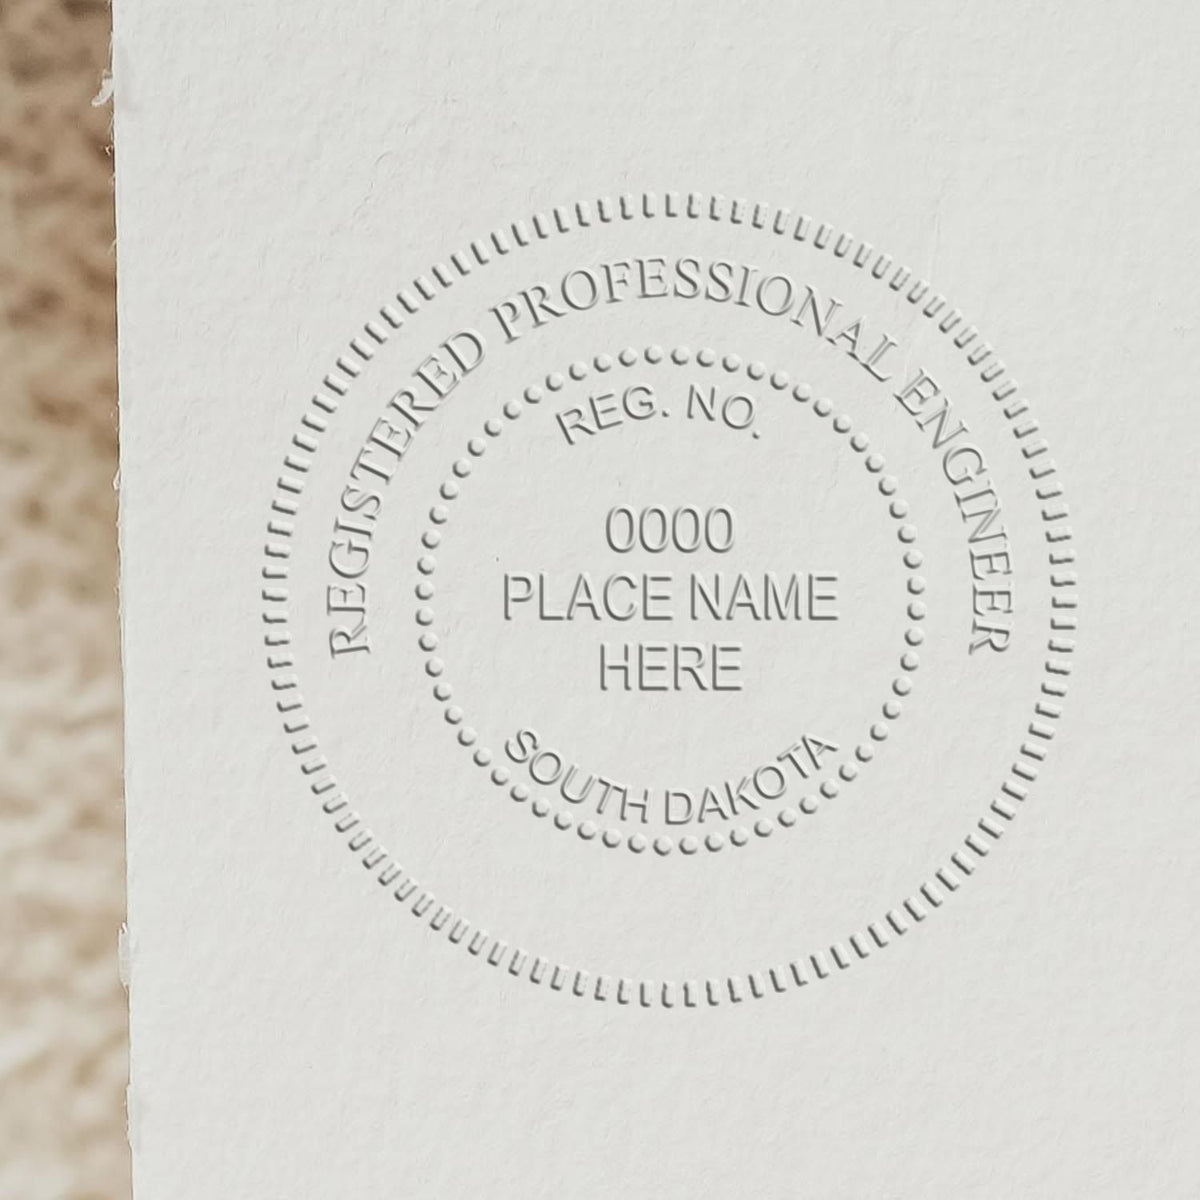 The State of South Dakota Extended Long Reach Engineer Seal stamp impression comes to life with a crisp, detailed photo on paper - showcasing true professional quality.